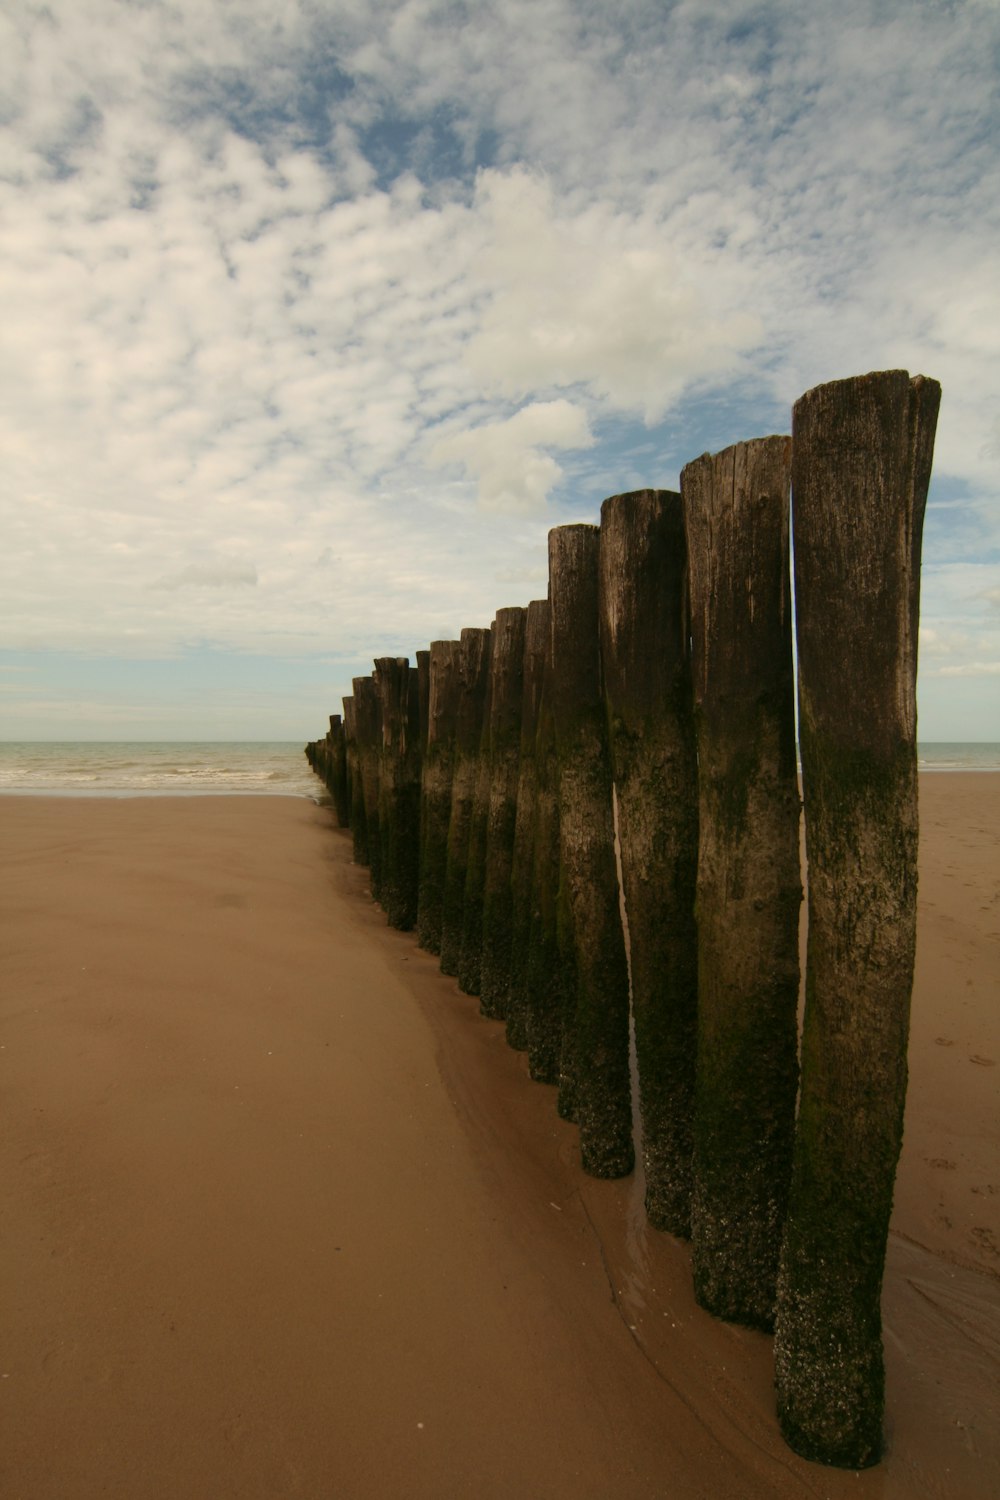 a row of wooden posts sitting on top of a sandy beach